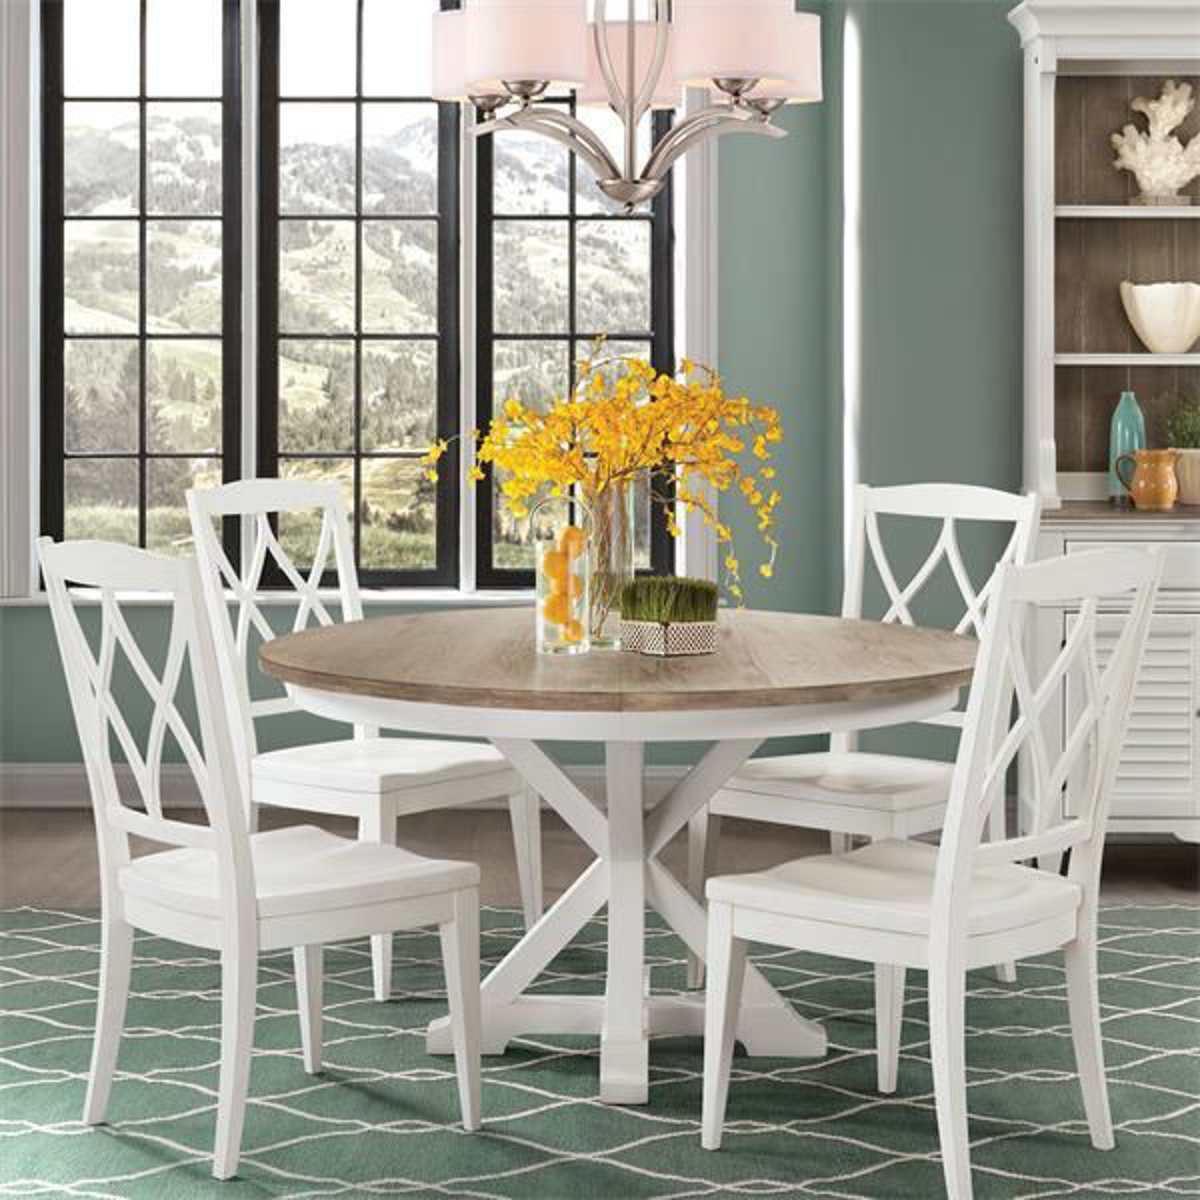 Picture of Myra White 5 Piece Dining Room Set